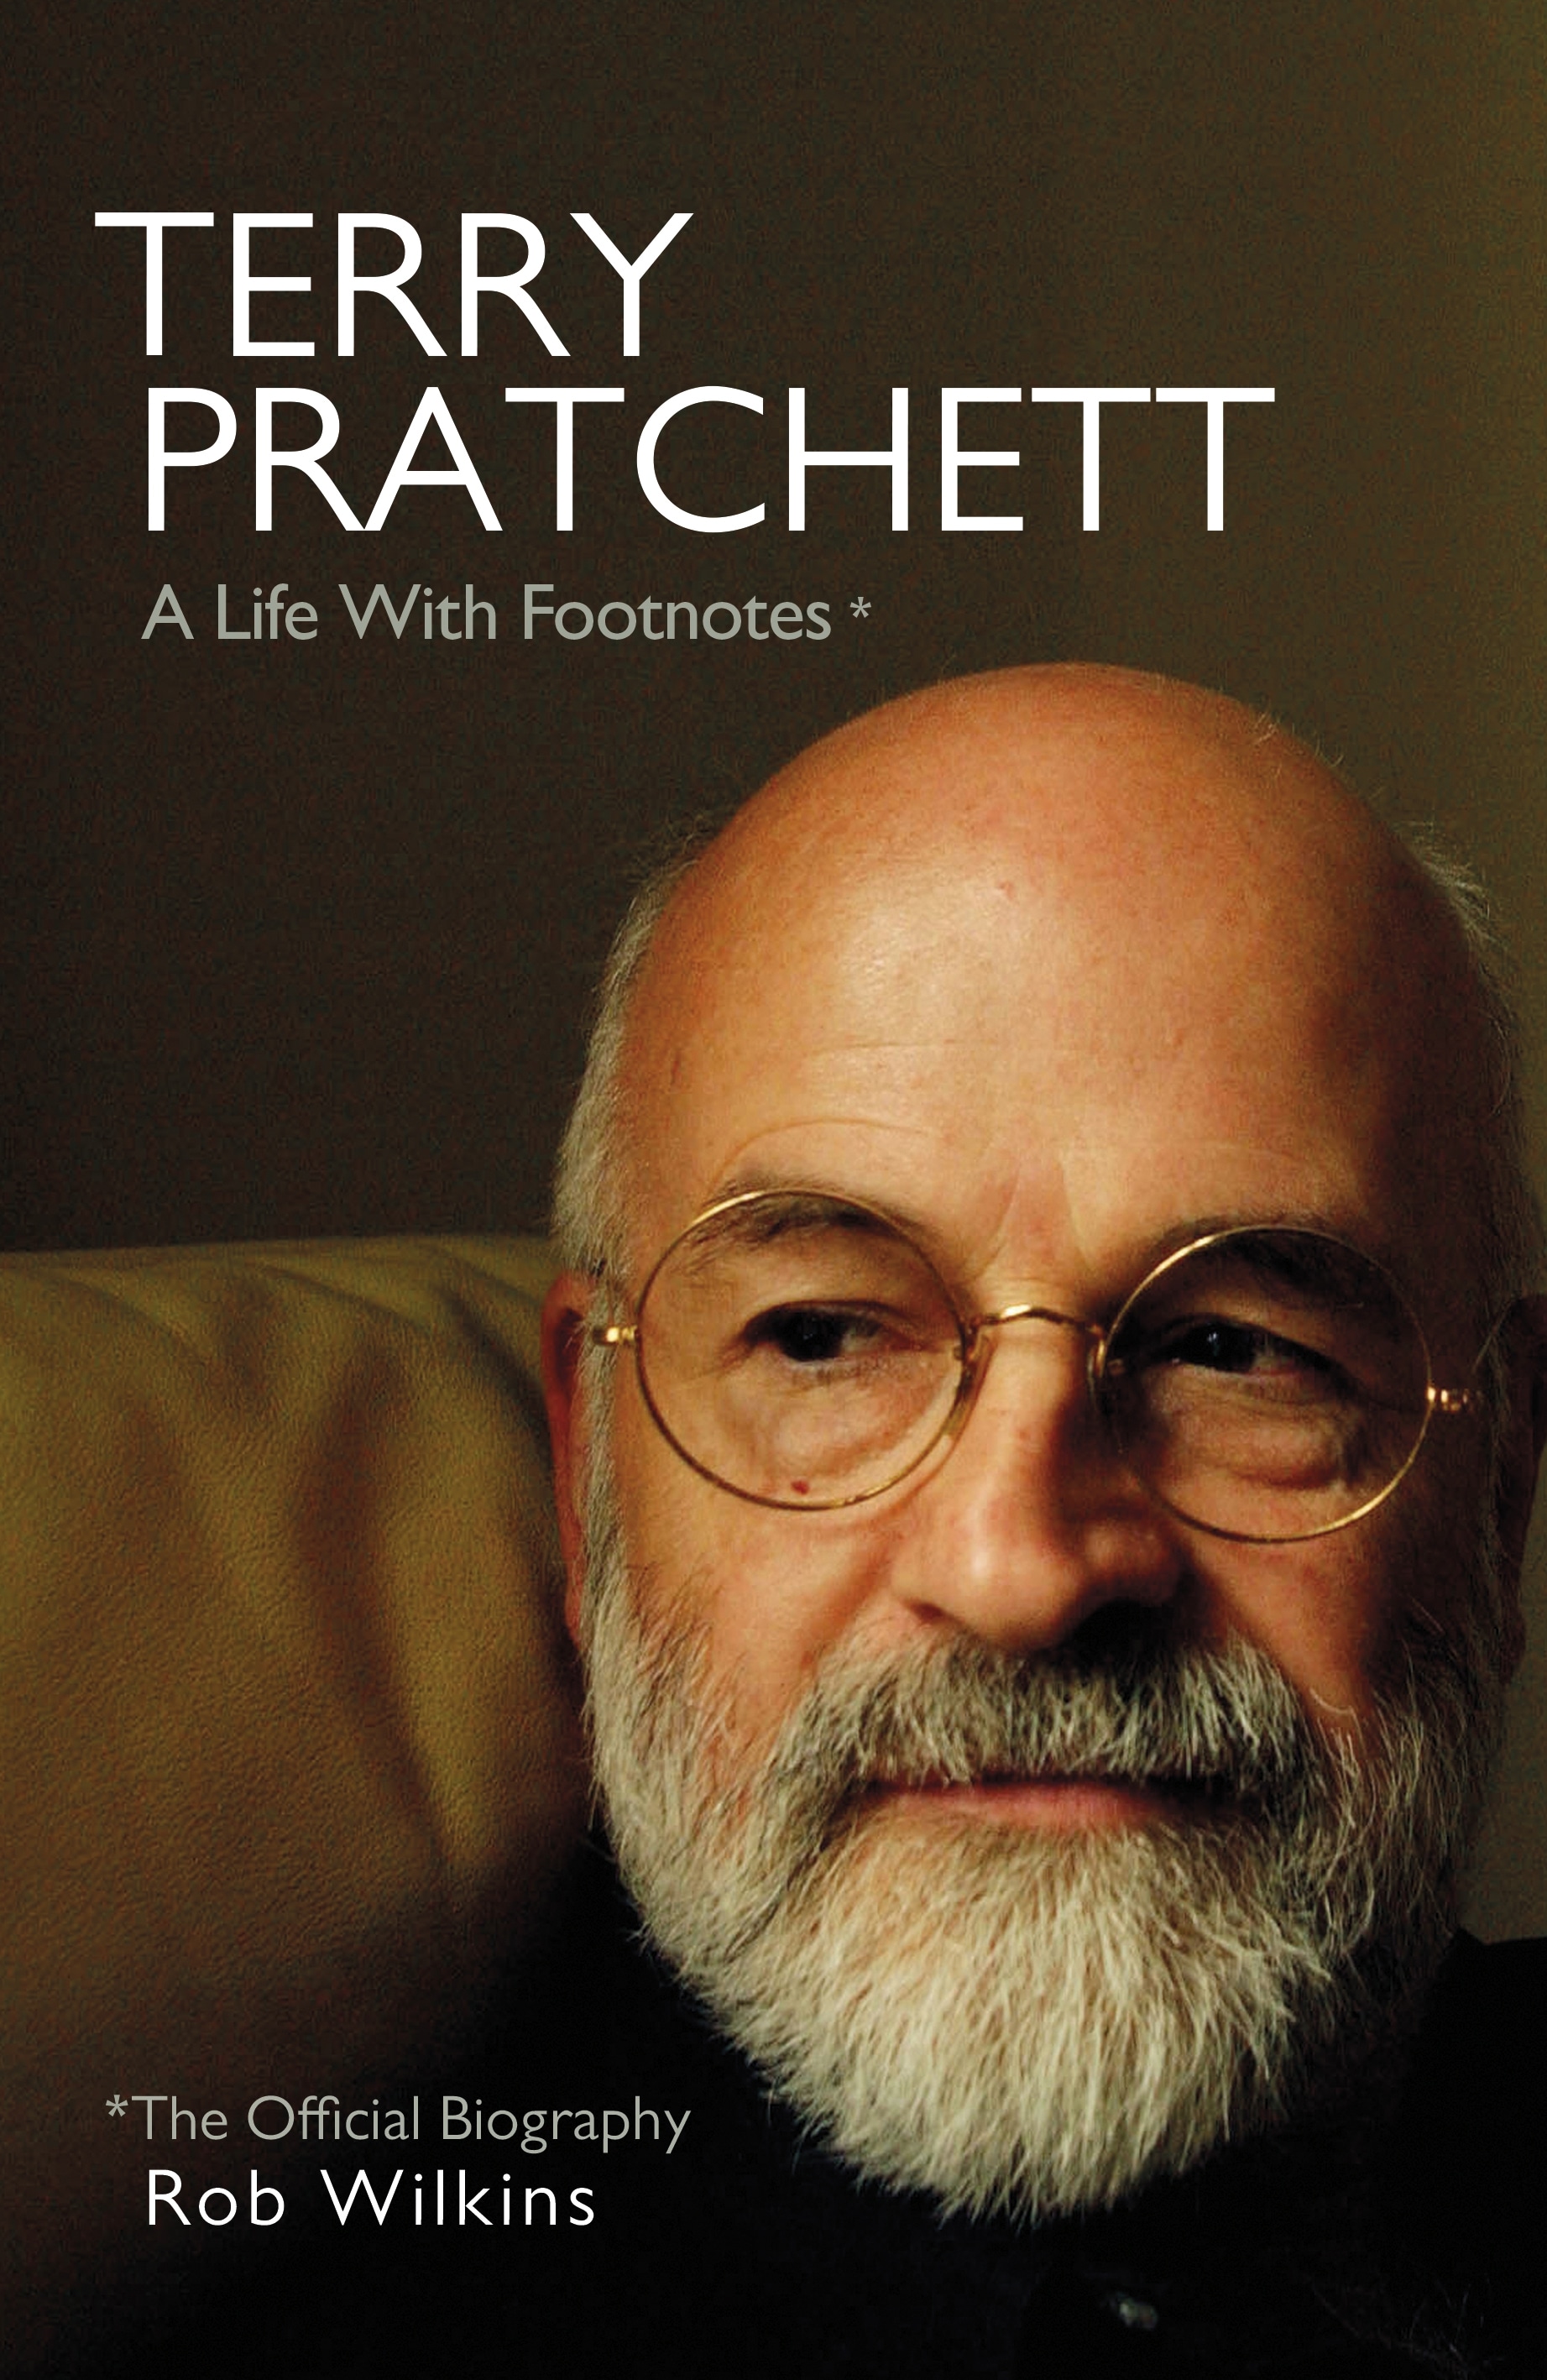 Book “Terry Pratchett: A Life With Footnotes” by Rob Wilkins — September 29, 2022